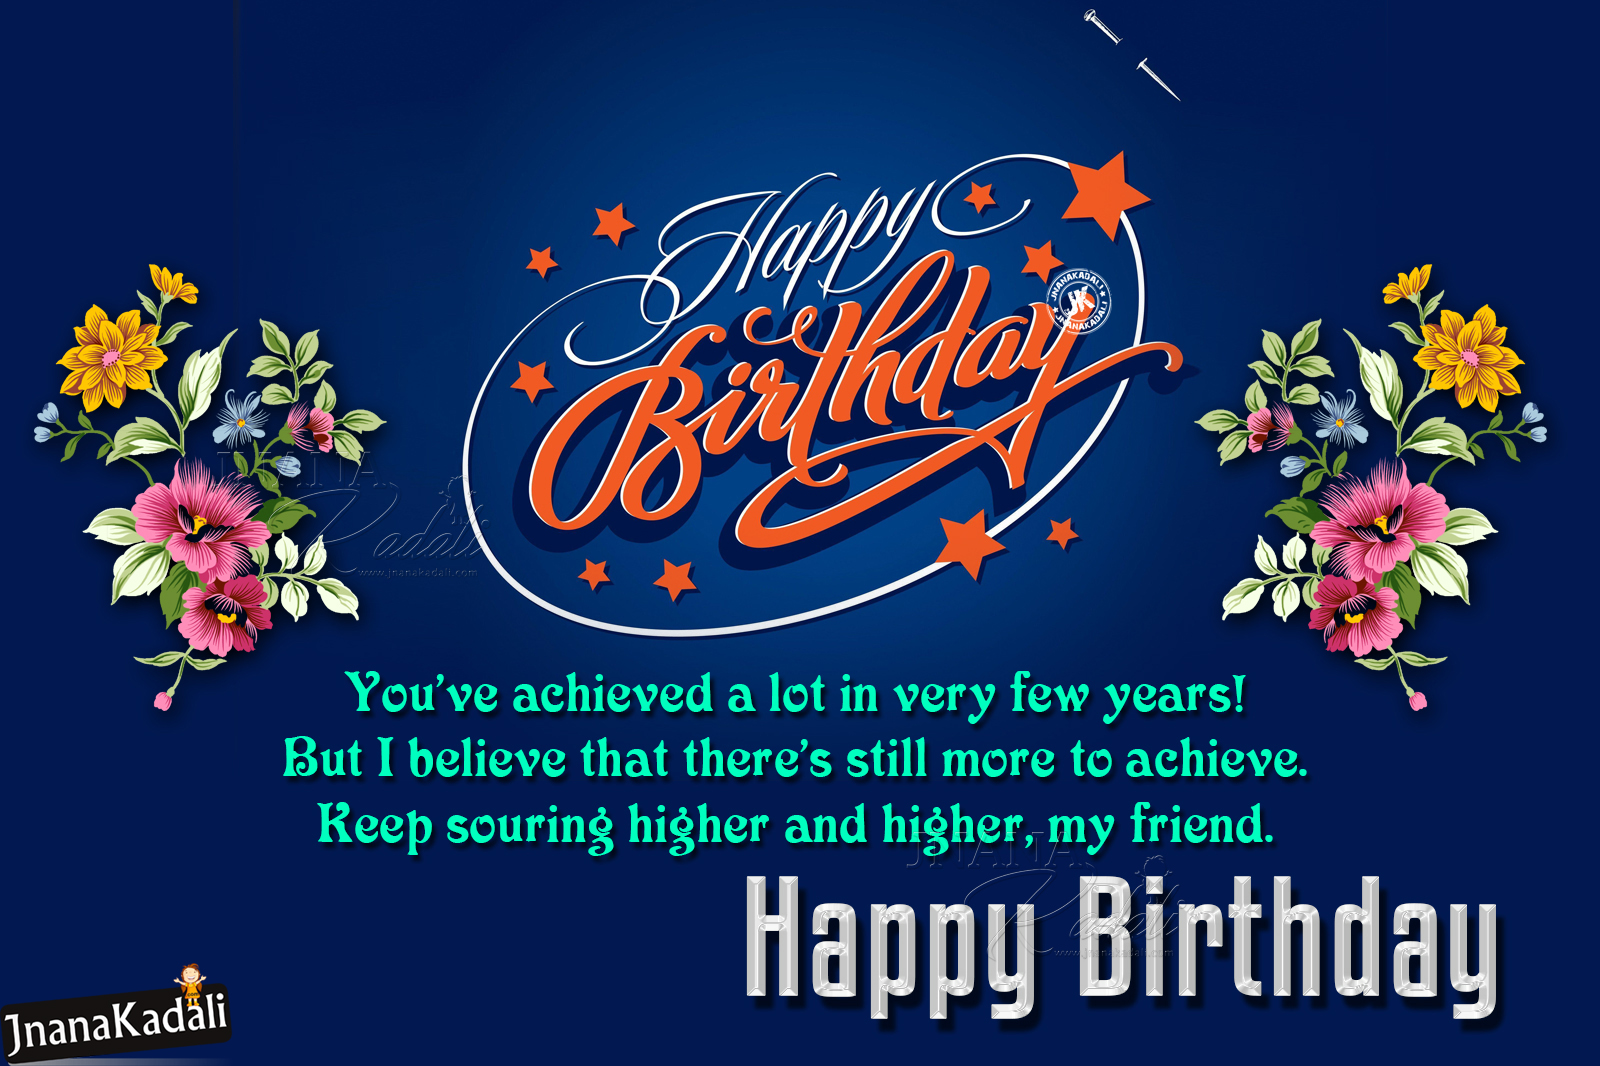 Whats app Sharing best Birthday Wishes Greetings Quotes in English ...